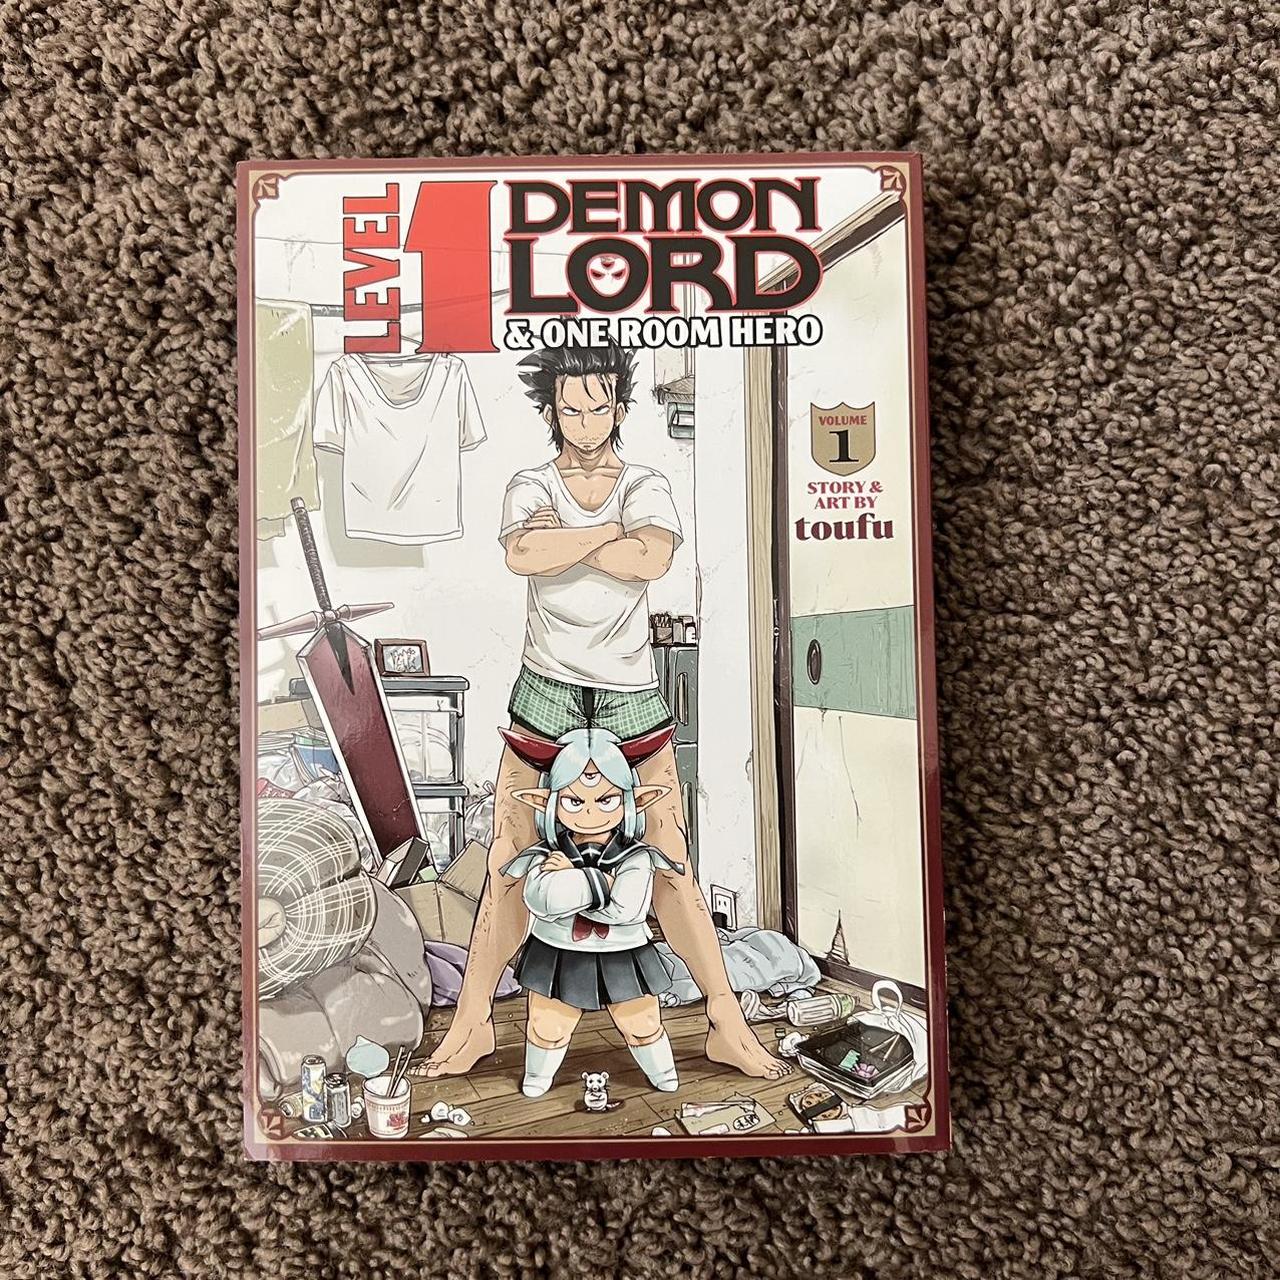 Level 1 Demon Lord and One Room Hero Vol. 1 by Toufu